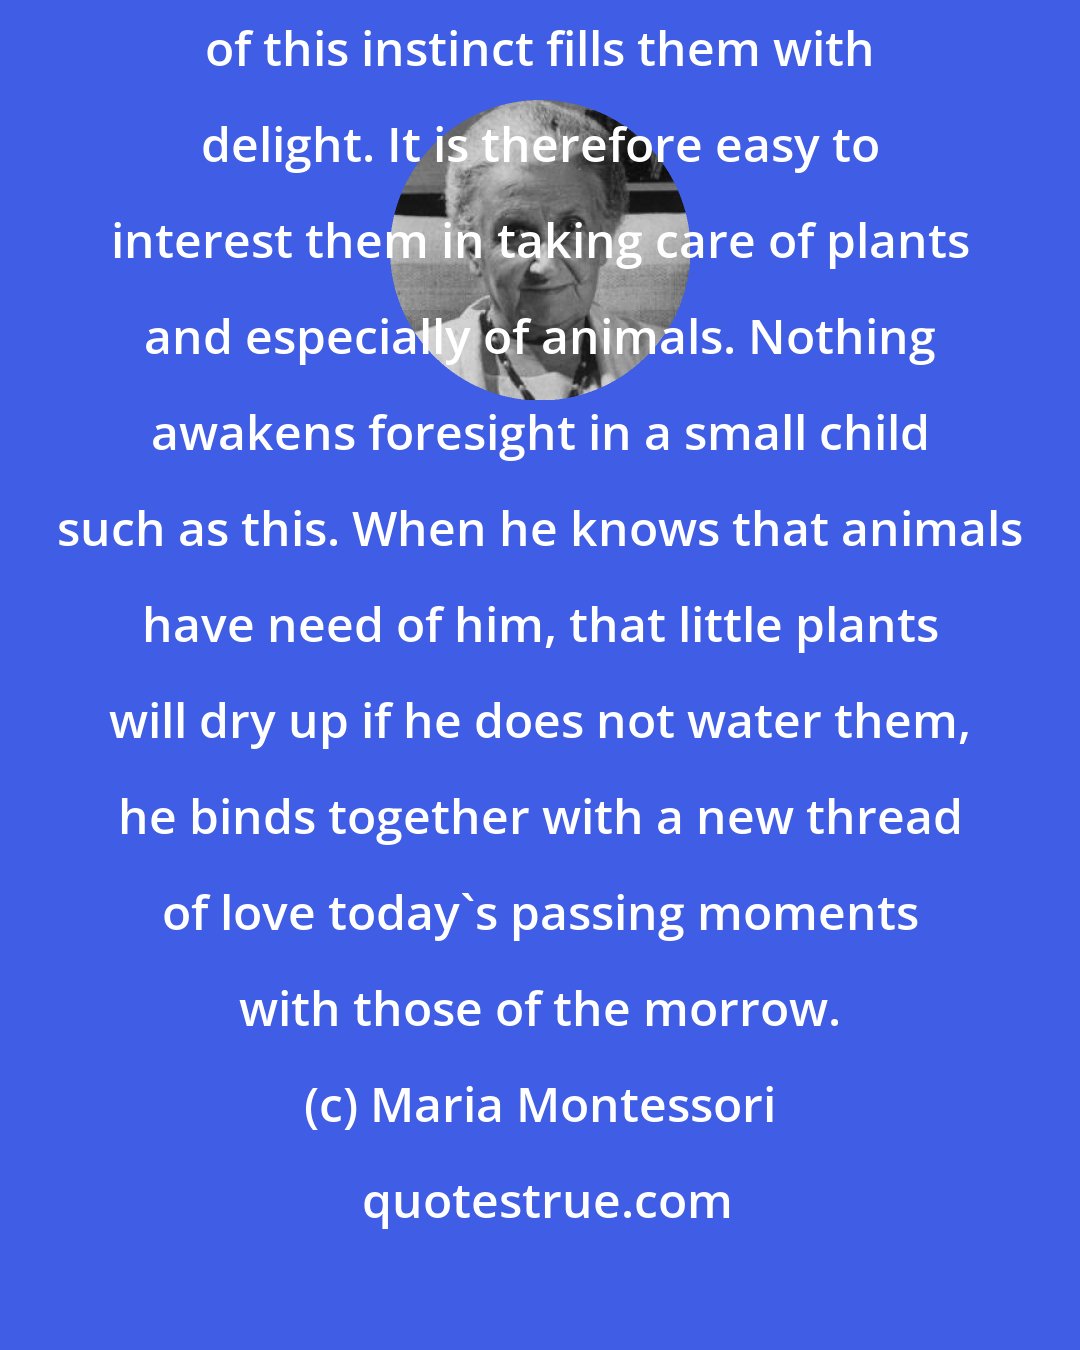 Maria Montessori: Children have an anxious concern for living beings, and the satisfaction of this instinct fills them with delight. It is therefore easy to interest them in taking care of plants and especially of animals. Nothing awakens foresight in a small child such as this. When he knows that animals have need of him, that little plants will dry up if he does not water them, he binds together with a new thread of love today's passing moments with those of the morrow.